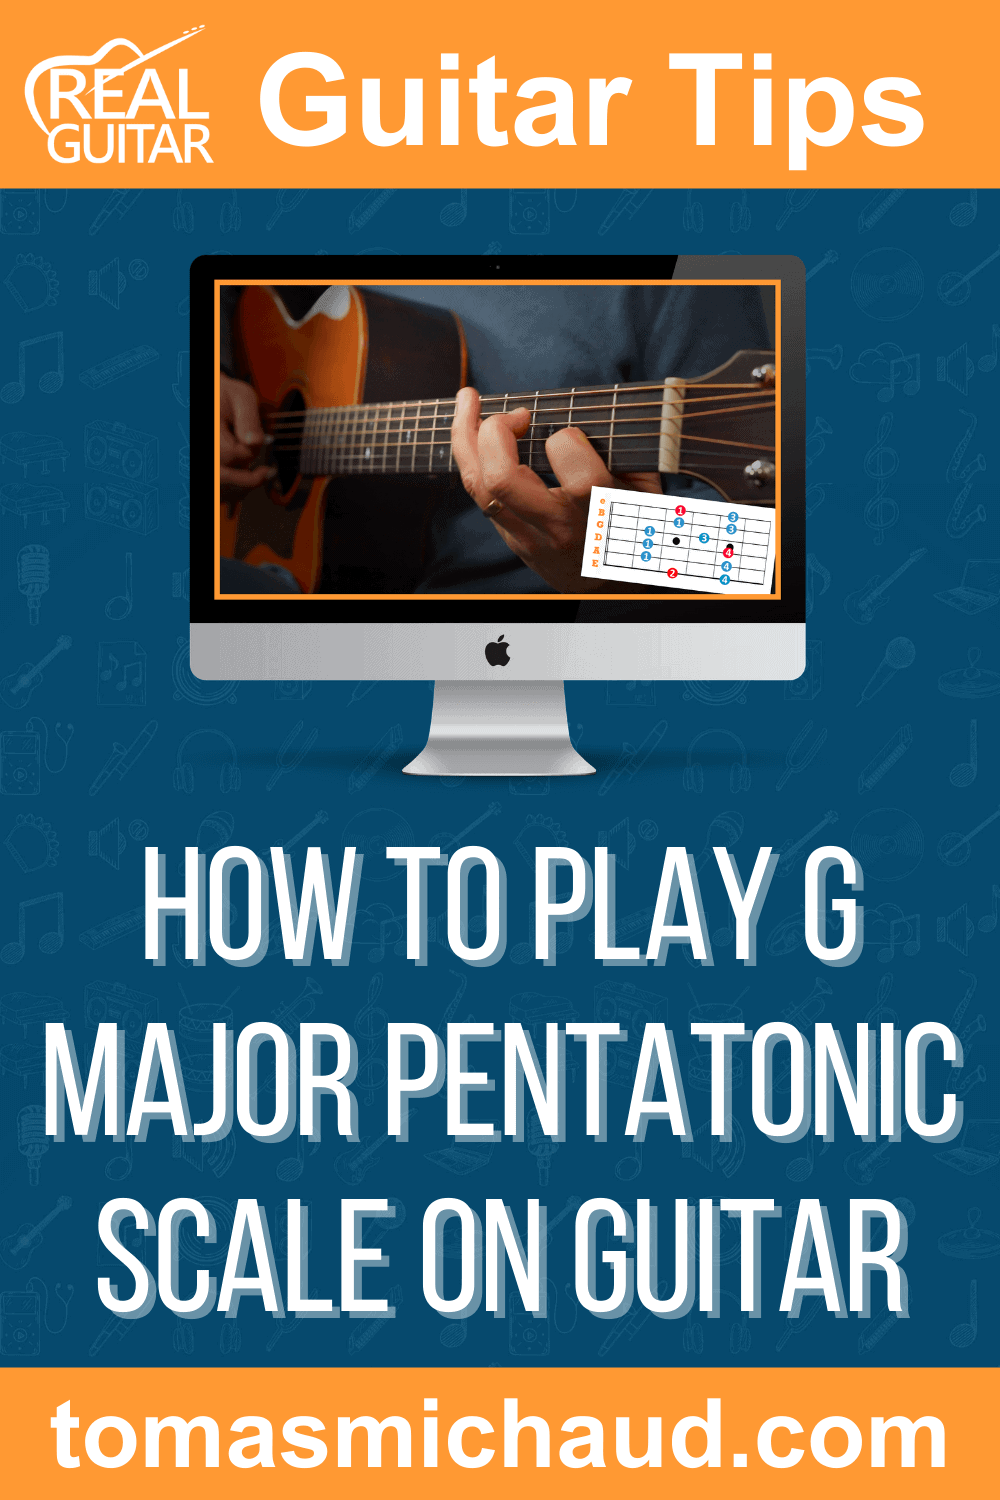 How to play G Major pentatonic scale on guitar